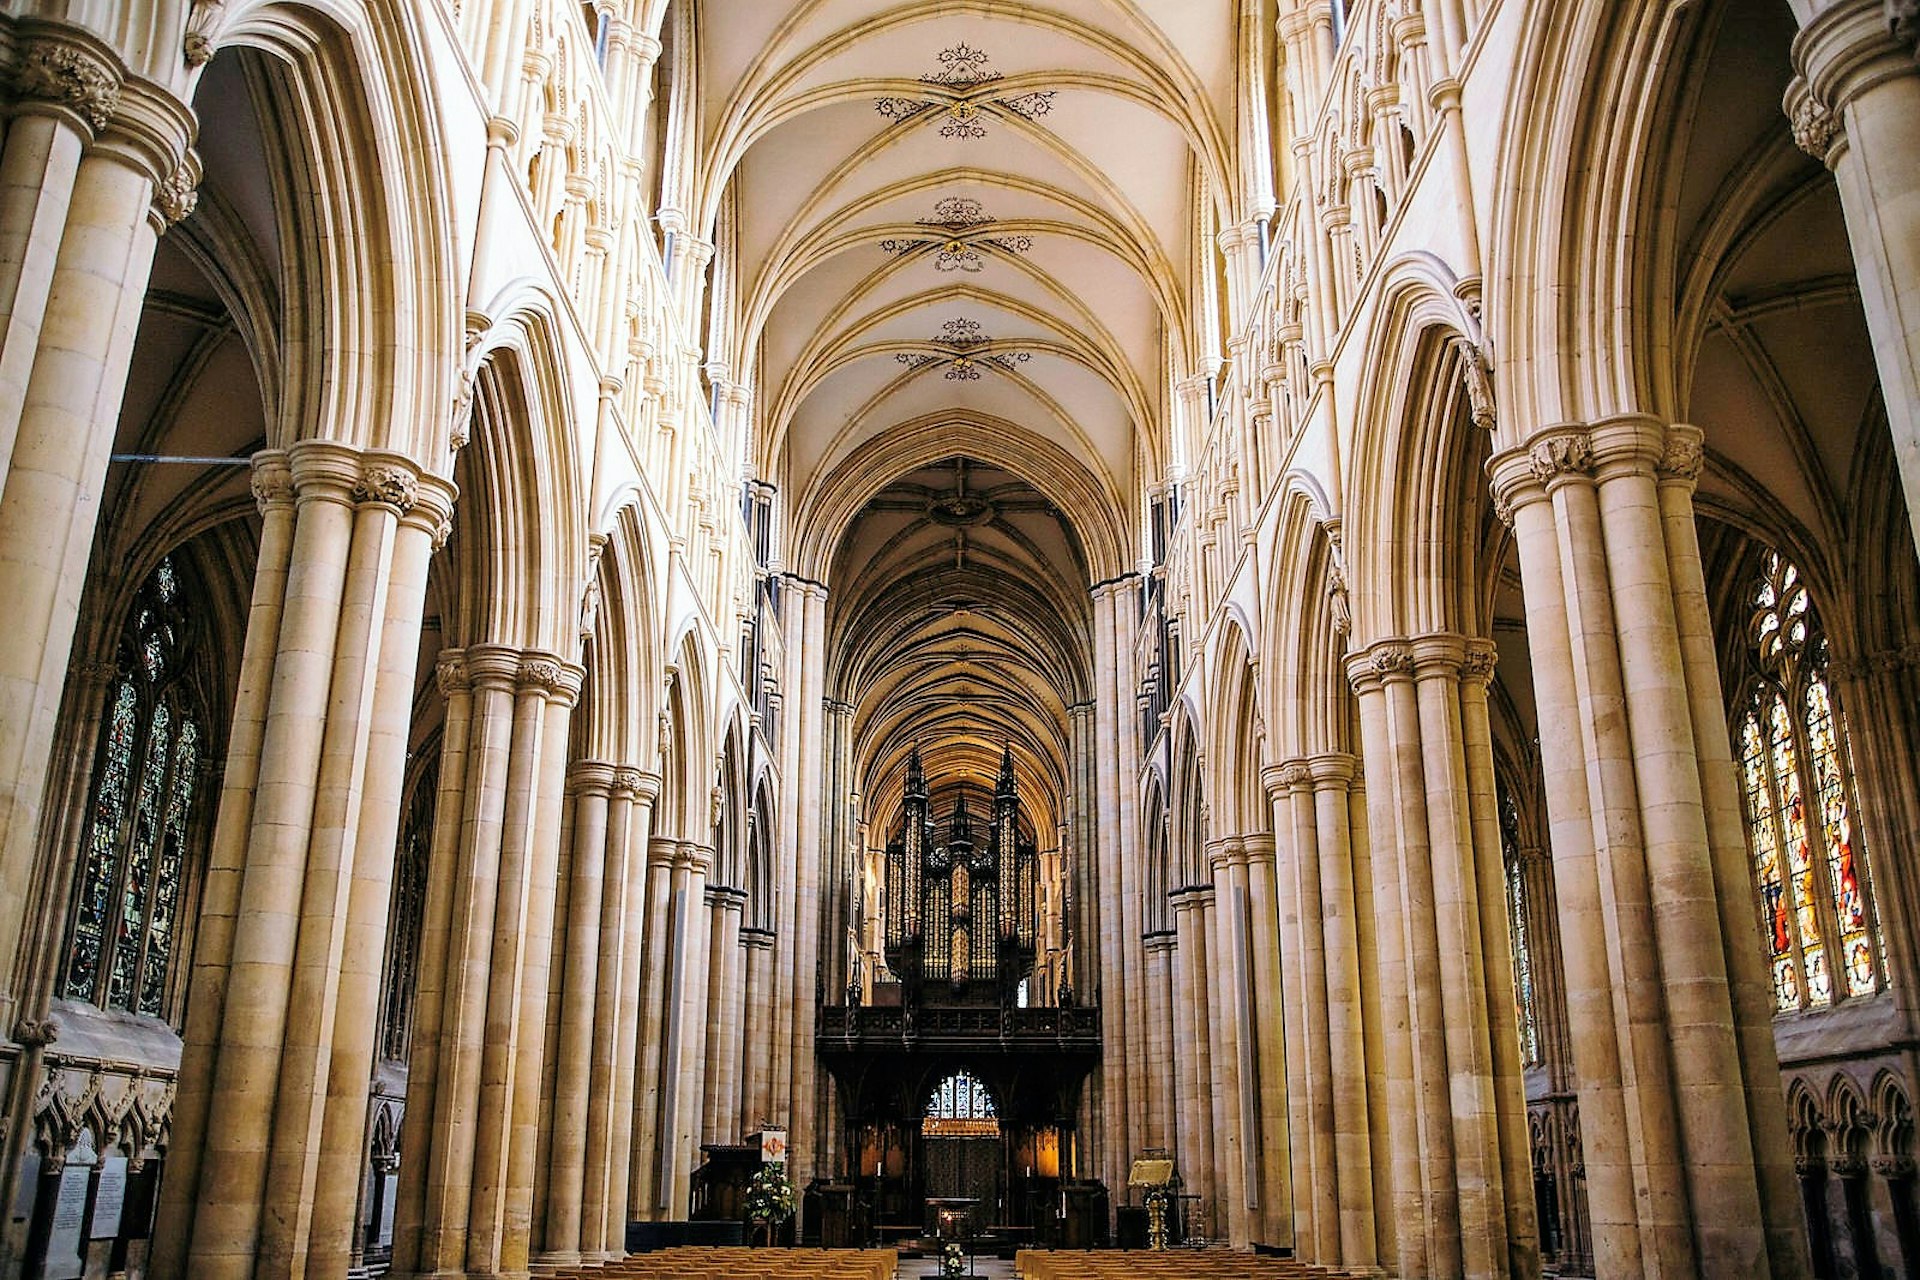 The interior of Beverley Minster is a gothic marvel ©Marika Evelyn Photography / Getty Images